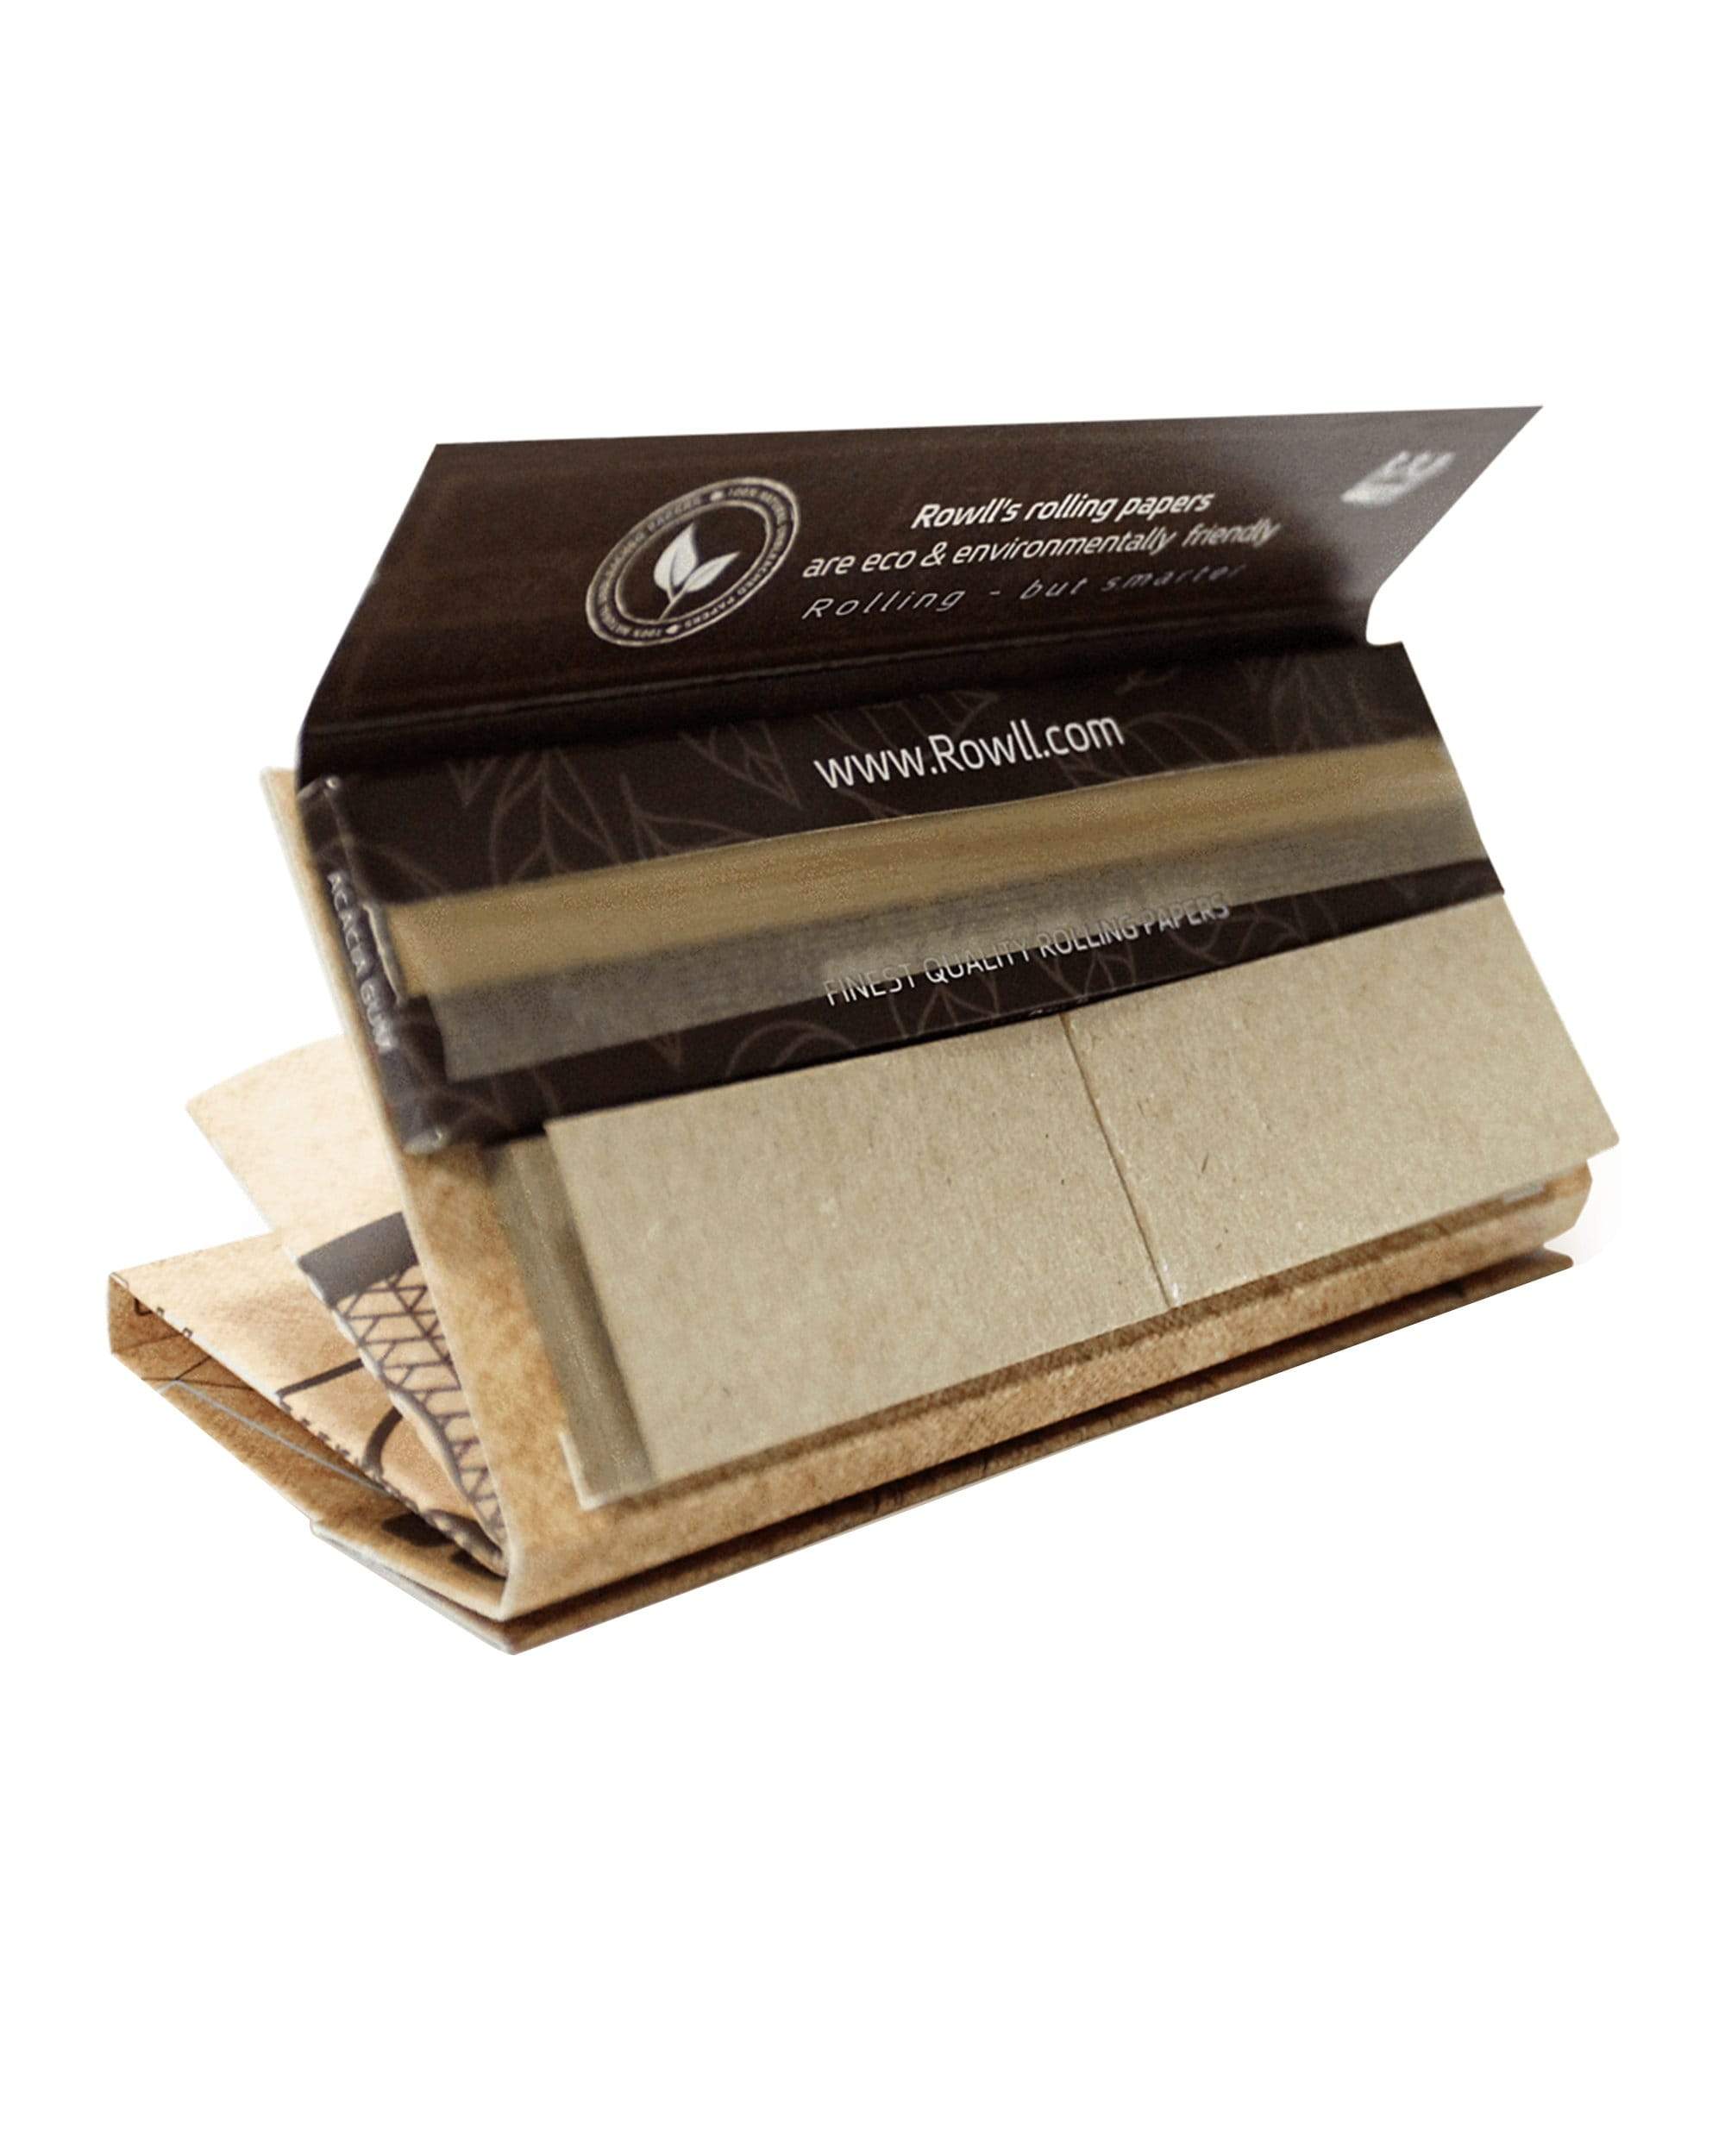 All in One Rolling Paper Kit w/ Grinder - Unbleached - Modern Day